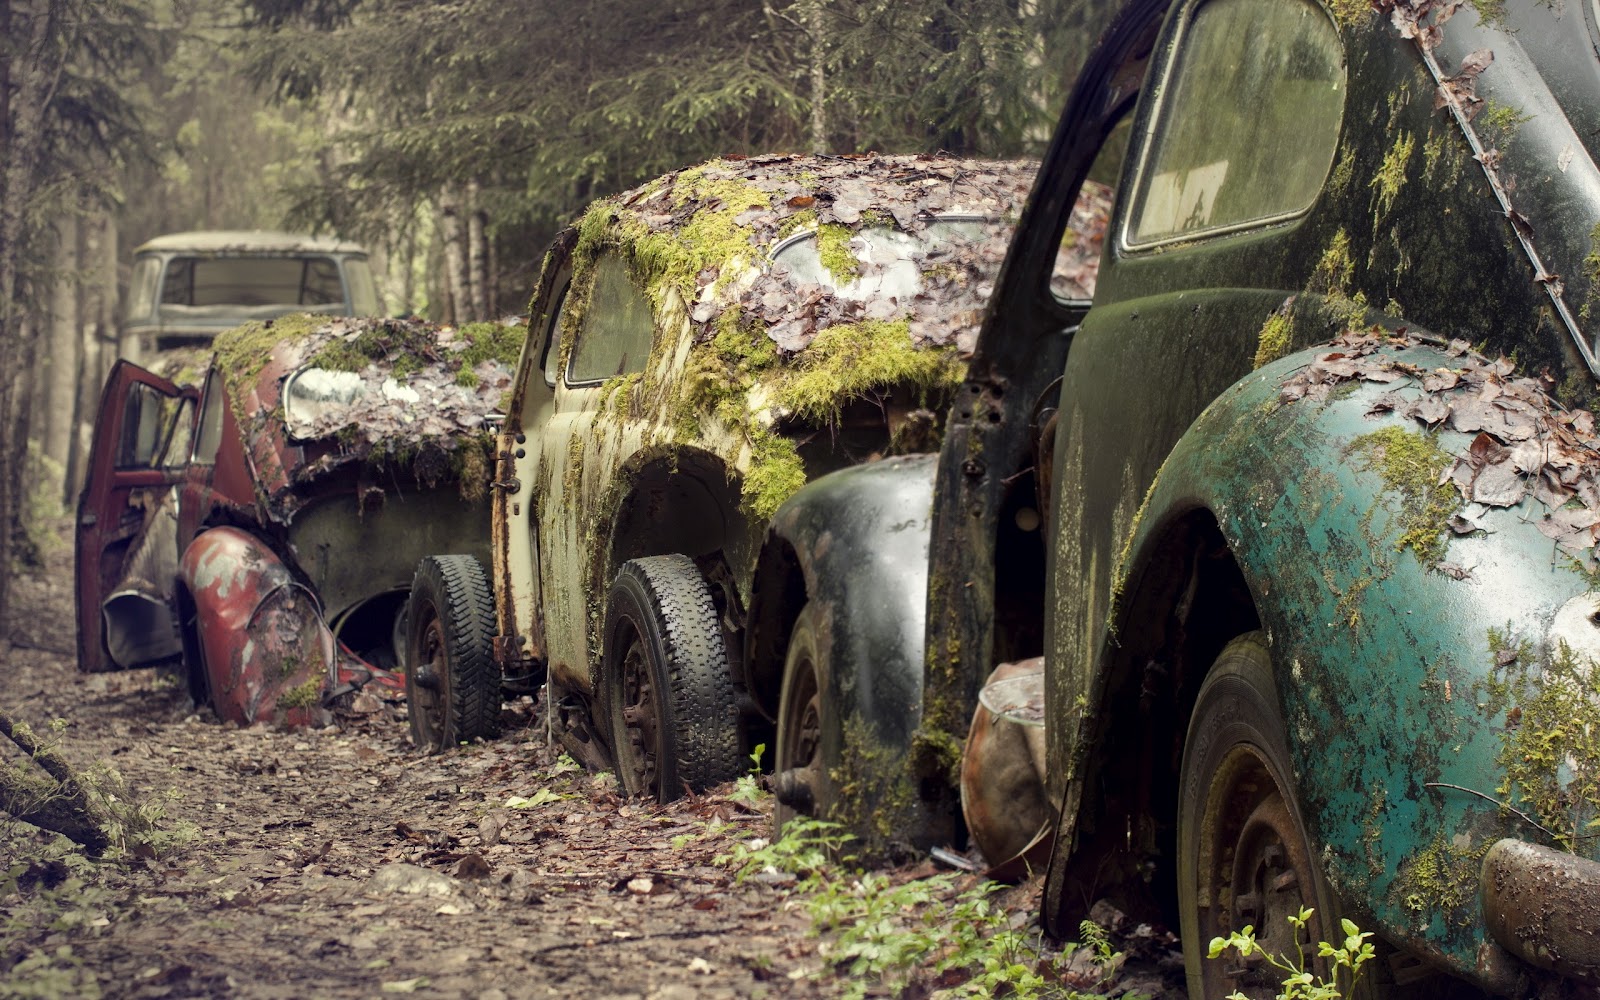 Volkswagen Beetle Vintage Cars Covered with Moss Awesome Photography